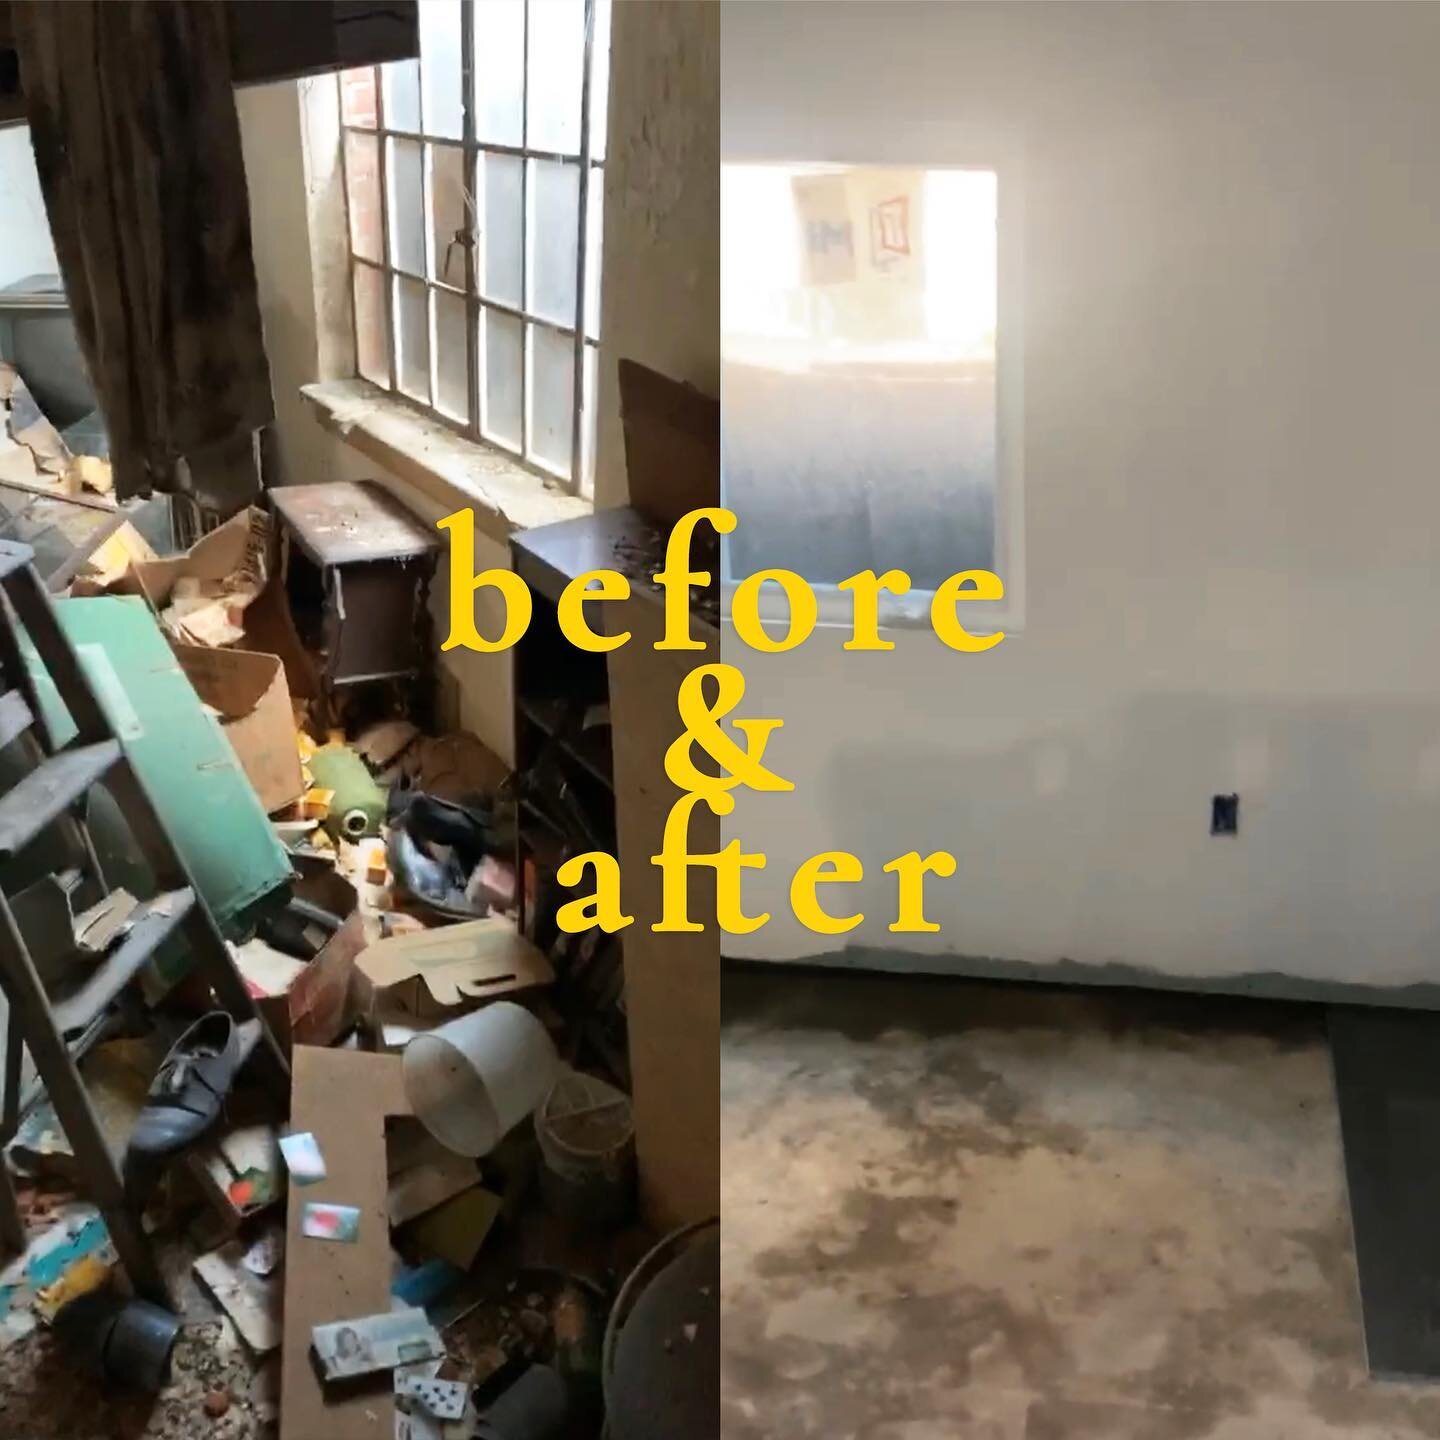 Do y&rsquo;all remember the basement in Arlington? 

➡️ Swipe left to see the progress 🦾✨ 

.⁣
.⁣
.⁣
.⁣
.⁣
#realestatecoach #houseflipper #remodeling #realestate #flippinghouses #fixandflip #realestateinvestment #realestateinvestors #houseflipping #